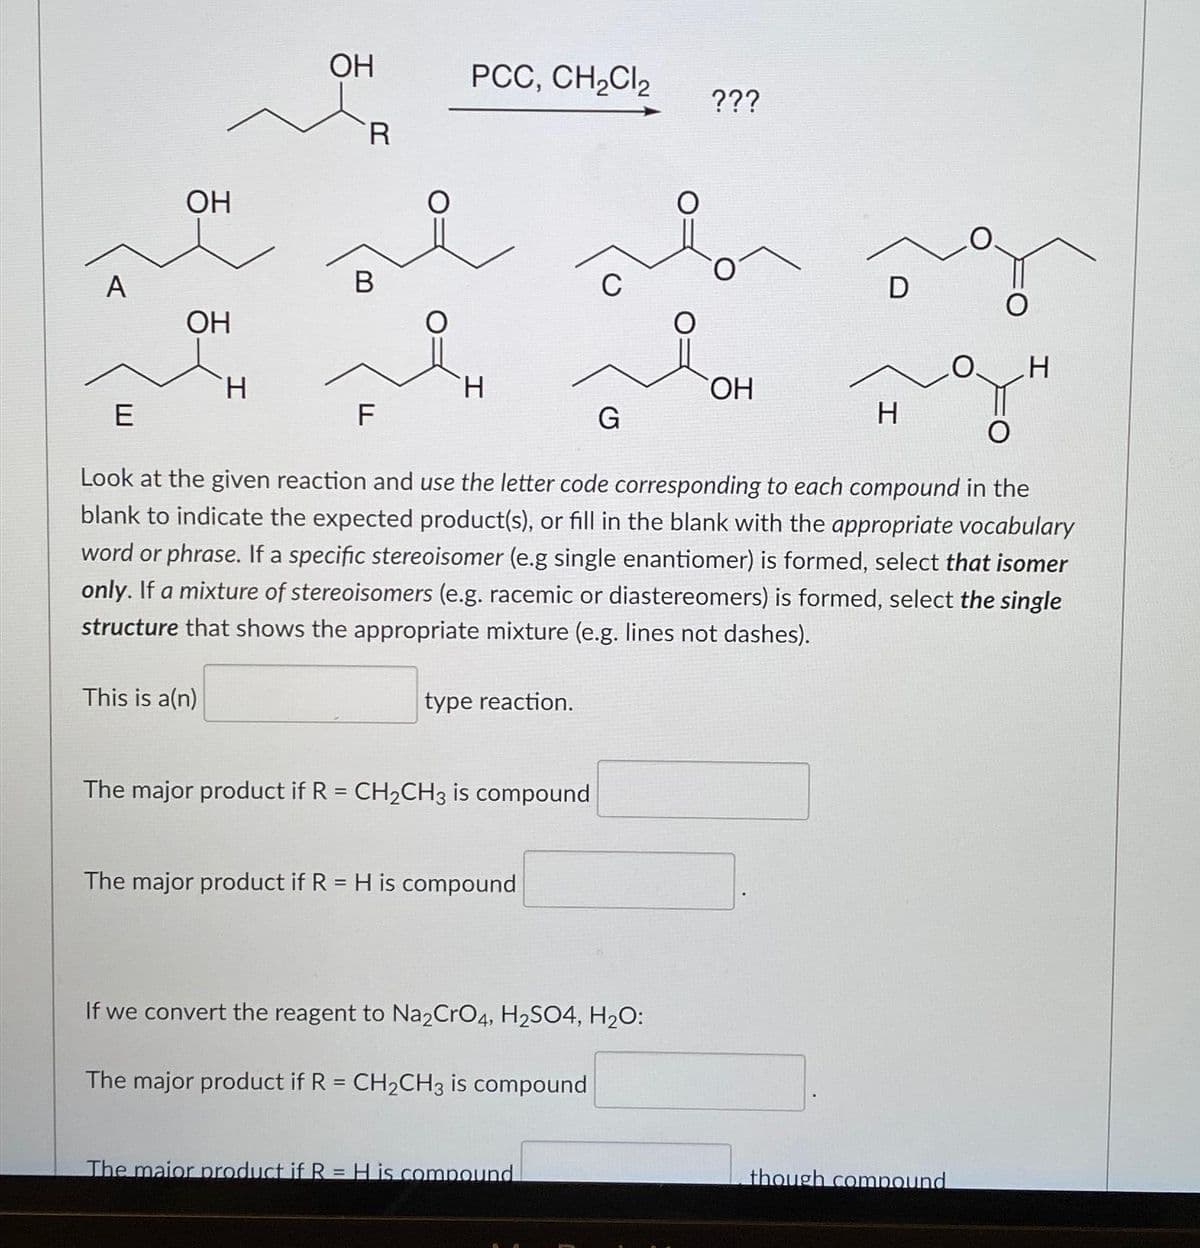 A
E
OH
OH
H
This is a(n)
OH
R
B
F
PCC, CH₂Cl₂
H
type reaction.
The major product if R = CH₂CH3 is compound
The major product if R = H is compound
G
Look at the given reaction and use the letter code corresponding to each compound in the
blank to indicate the expected product(s), or fill in the blank with the appropriate vocabulary
word or phrase. If a specific stereoisomer (e.g single enantiomer) is formed, select that isomer
only. If a mixture of stereoisomers (e.g. racemic or diastereomers) is formed, select the single
structure that shows the appropriate mixture (e.g. lines not dashes).
If we convert the reagent to Na2CrO4, H₂SO4, H₂O:
The major product if R = CH₂CH3 is compound
The maior product if R = H is compound
???
OH
D
H
H
though compound